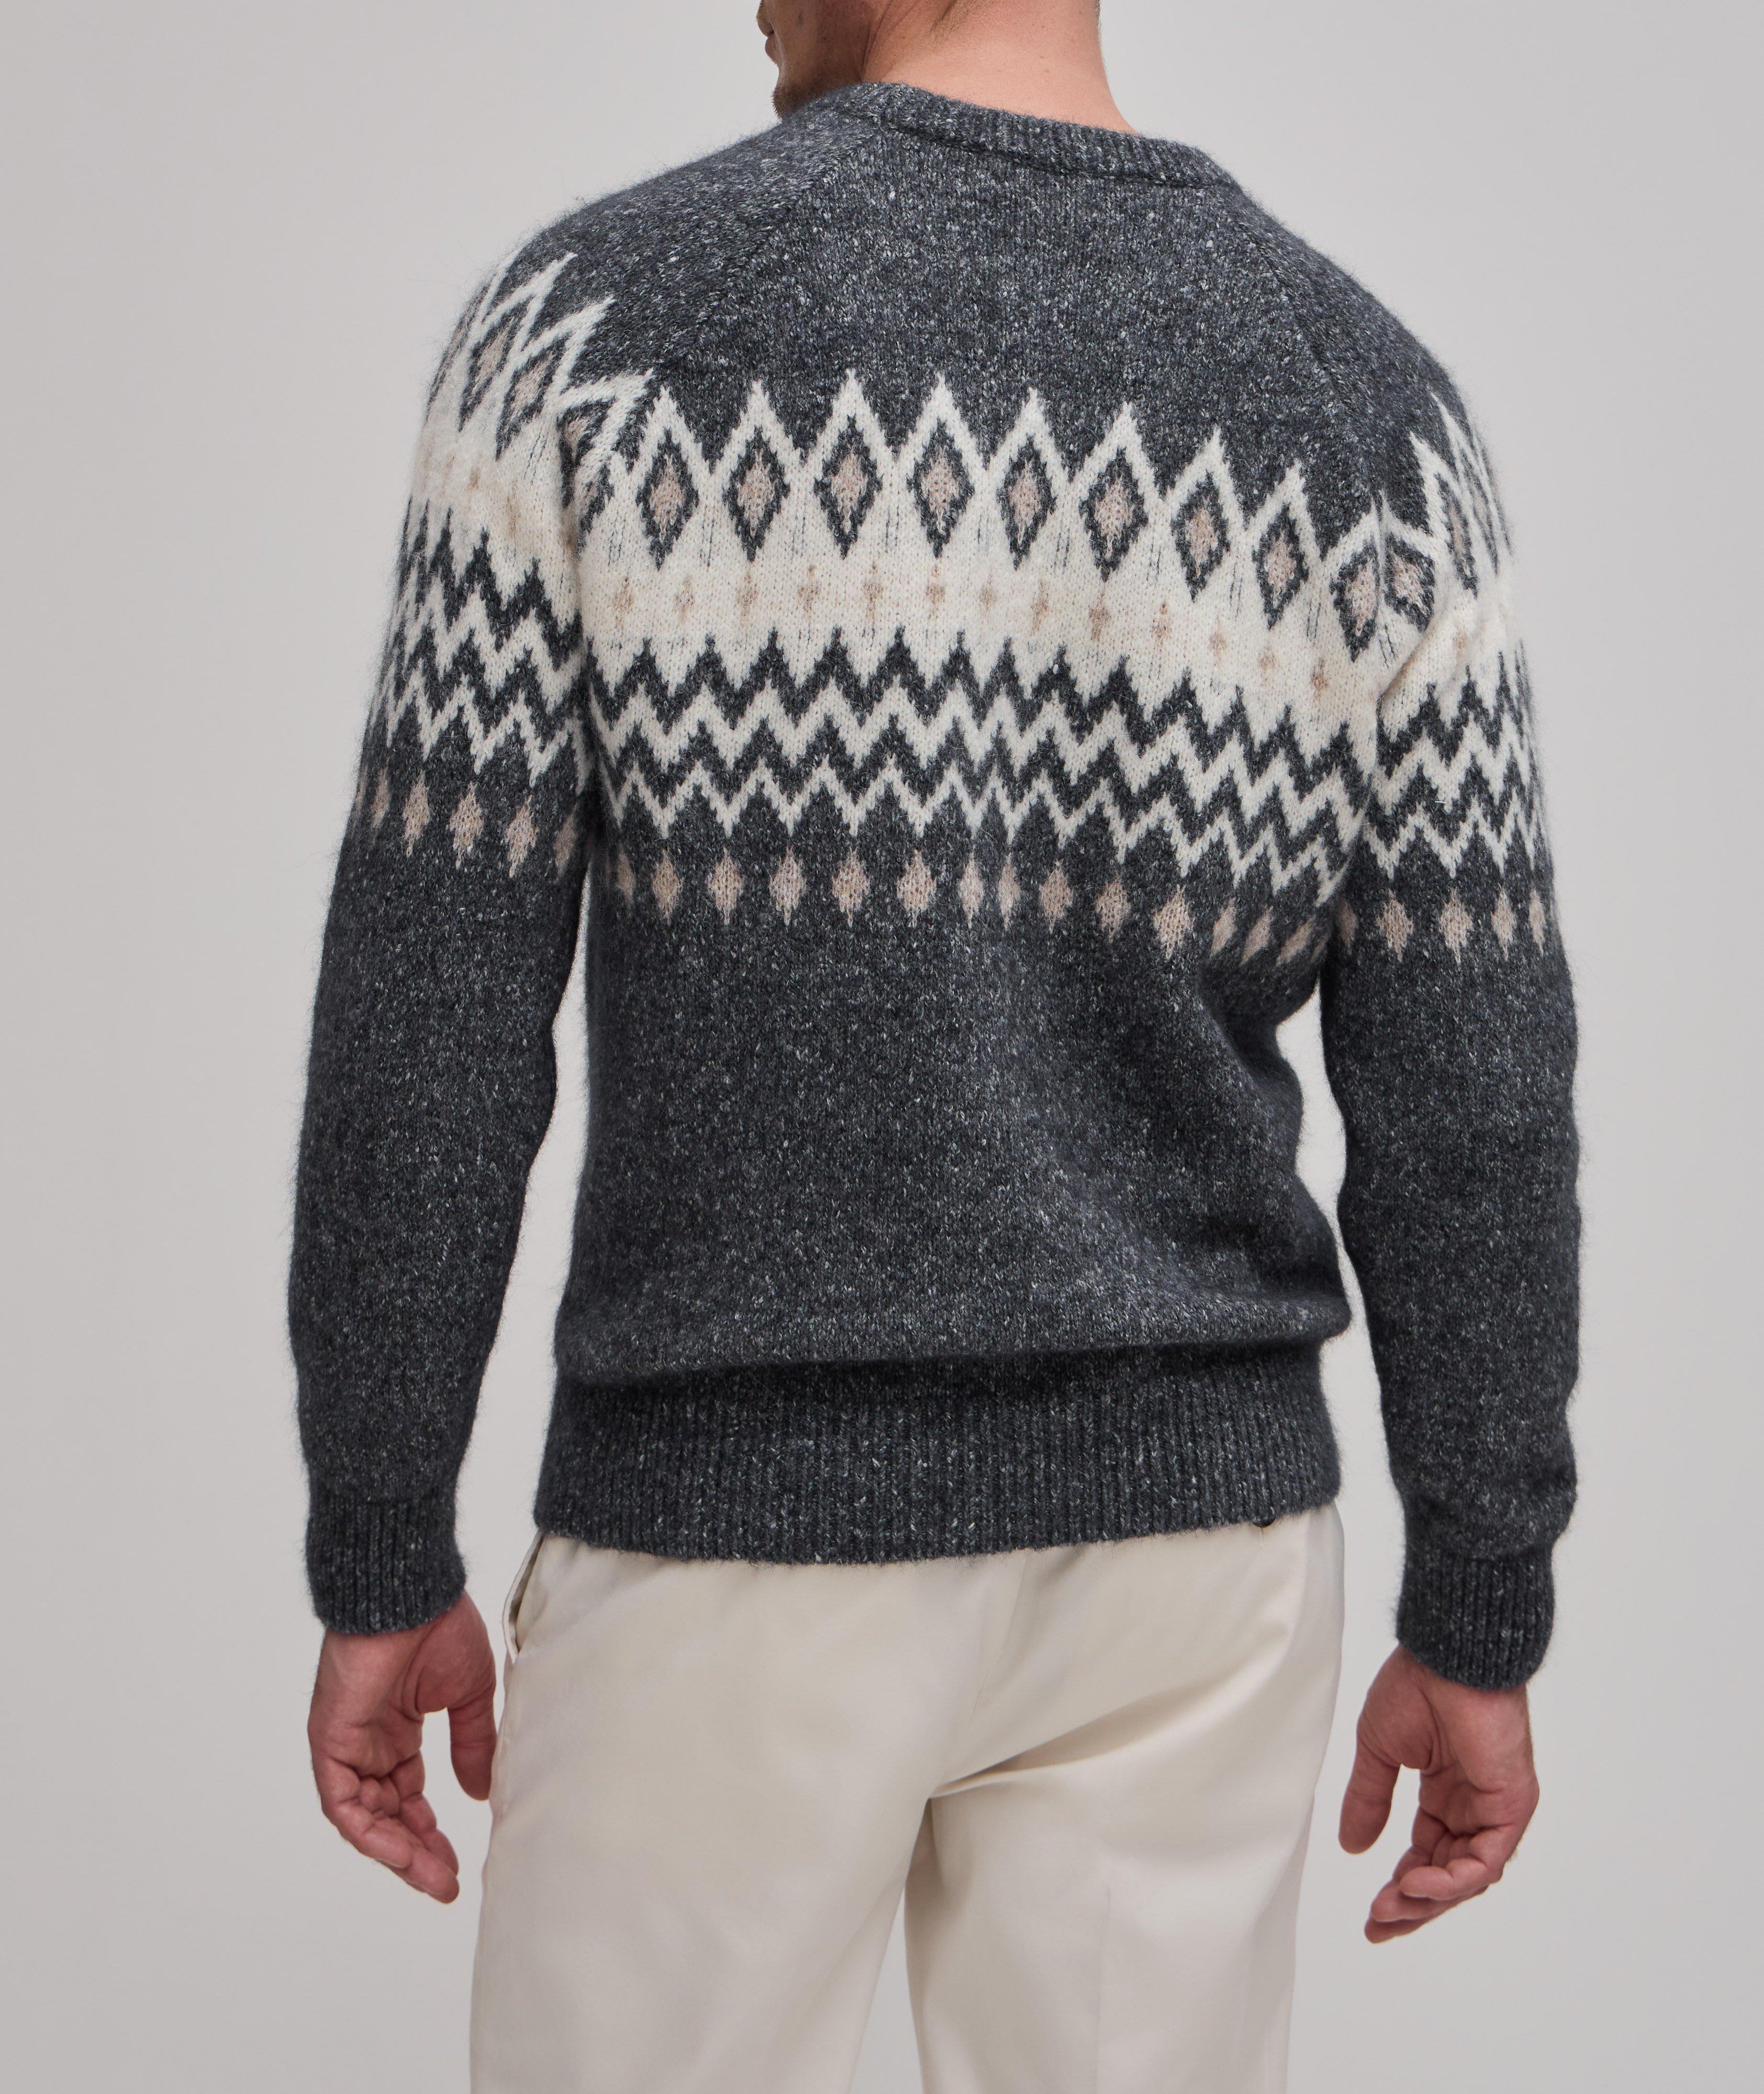 Brunello Cucinelli Cashmere Collection Fair Isle Sweater, Sweaters & Knits